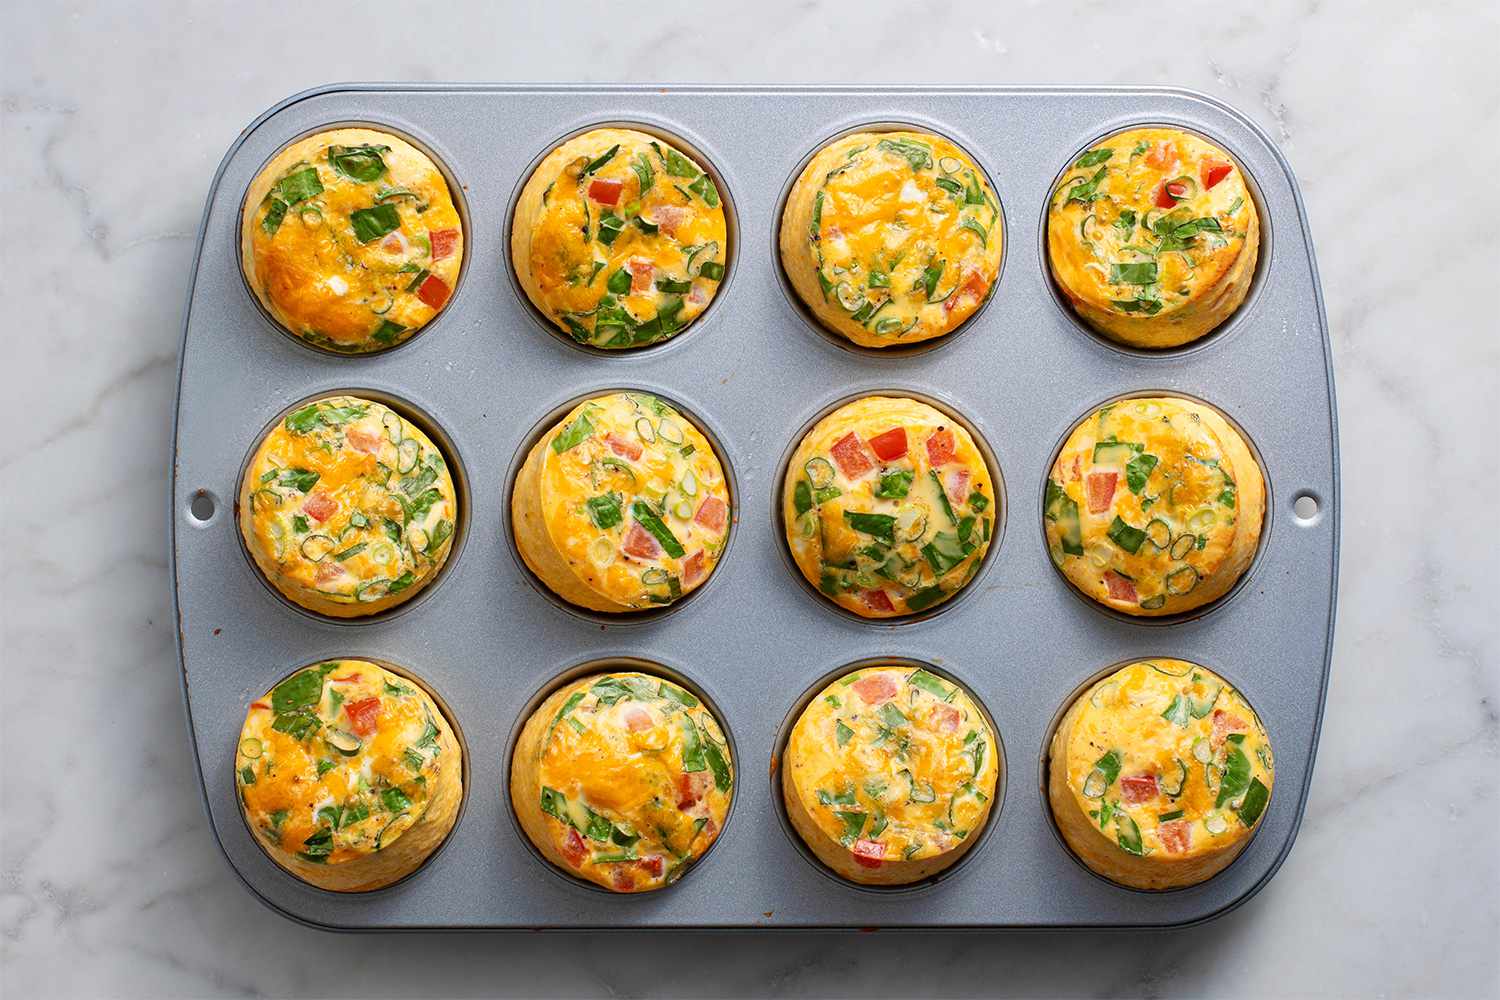 How to Make Egg Bites Recipe (in the Oven!)